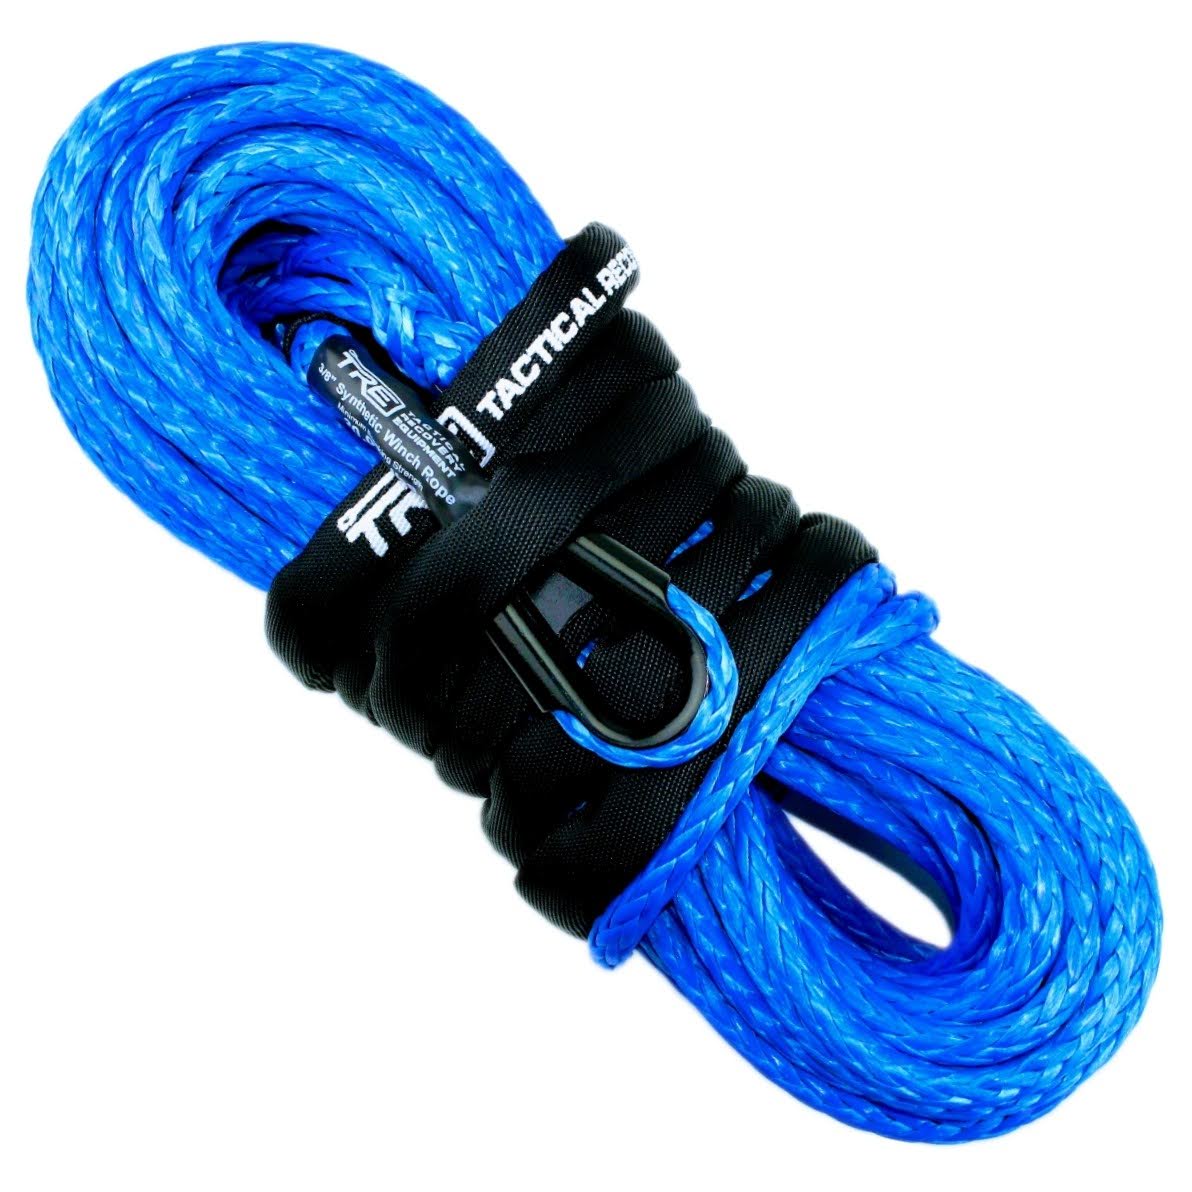  ZESUPER 3/8 x 100ft Synthetic Winch Rope Dyneema 12 Strand  Winch Cable Car Tow Recovery Cable Winch Line Recovery Kit Winch  Replacement Cable 26500 lbs for 4WD Off Road Vehicle Truck